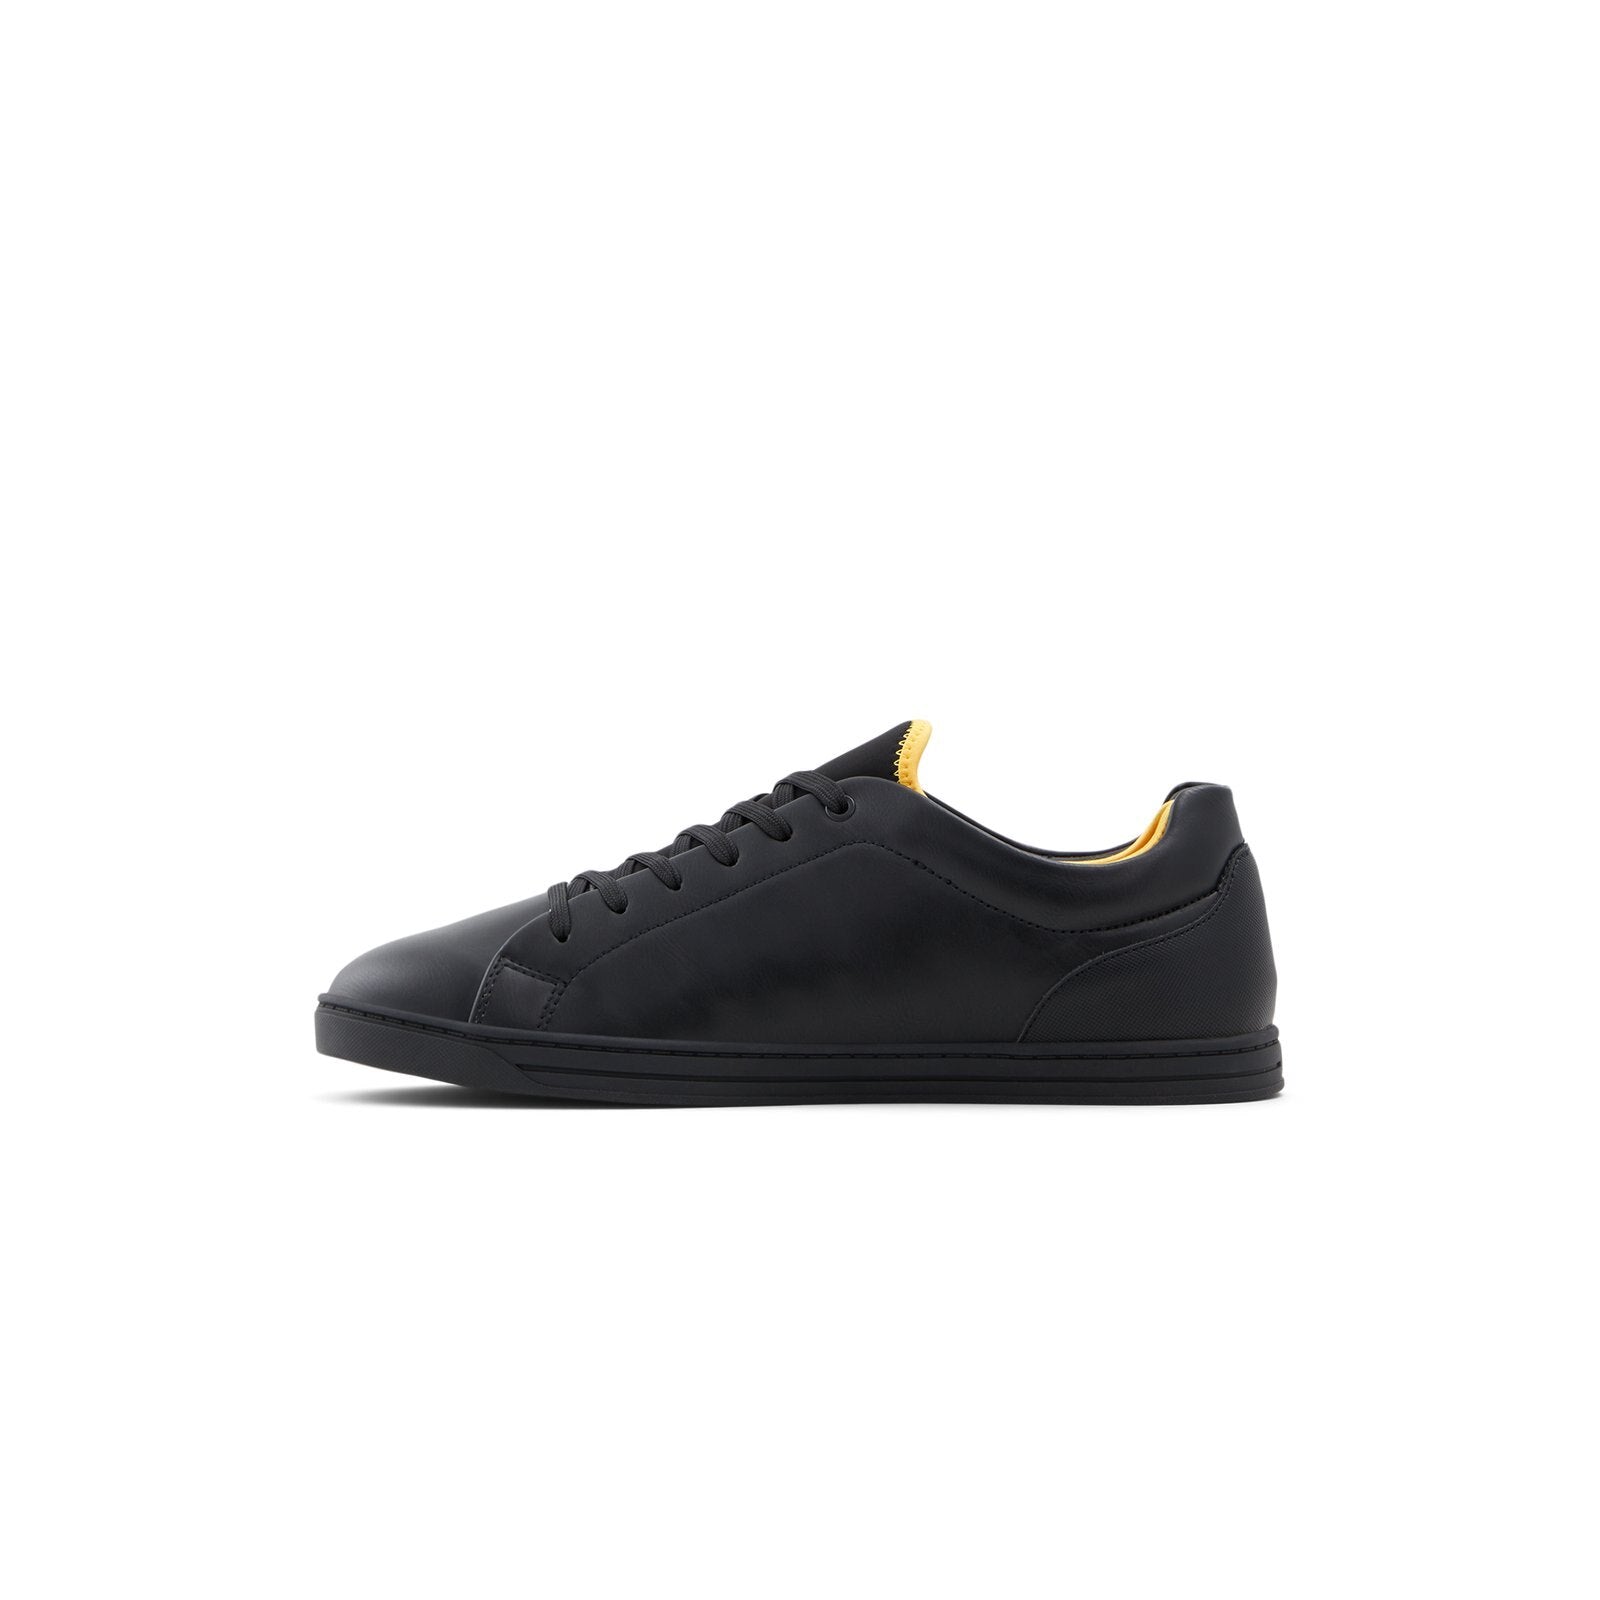 Luther / Casual Shoes Men Shoes - Black - CALL IT SPRING KSA